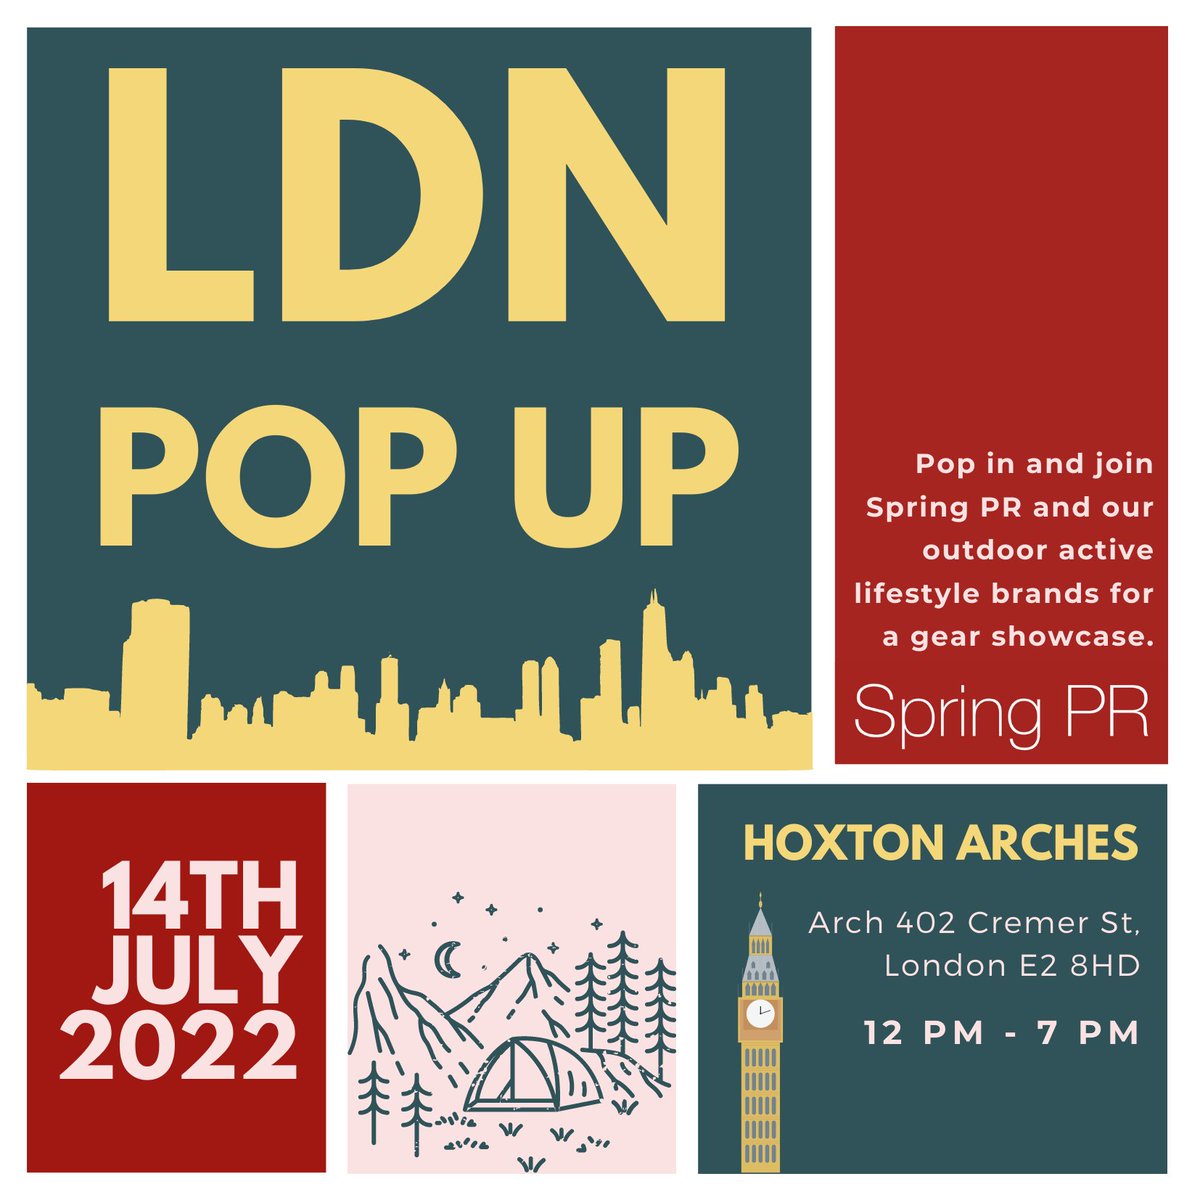 Our LDN Pop Up is back! Join us for a brand product showcase, burritos and goodie bags filled with some of our favourite outdoor and active lifestyle kit. RSVP: abbie@springpr.com. #journorequest #prrequest